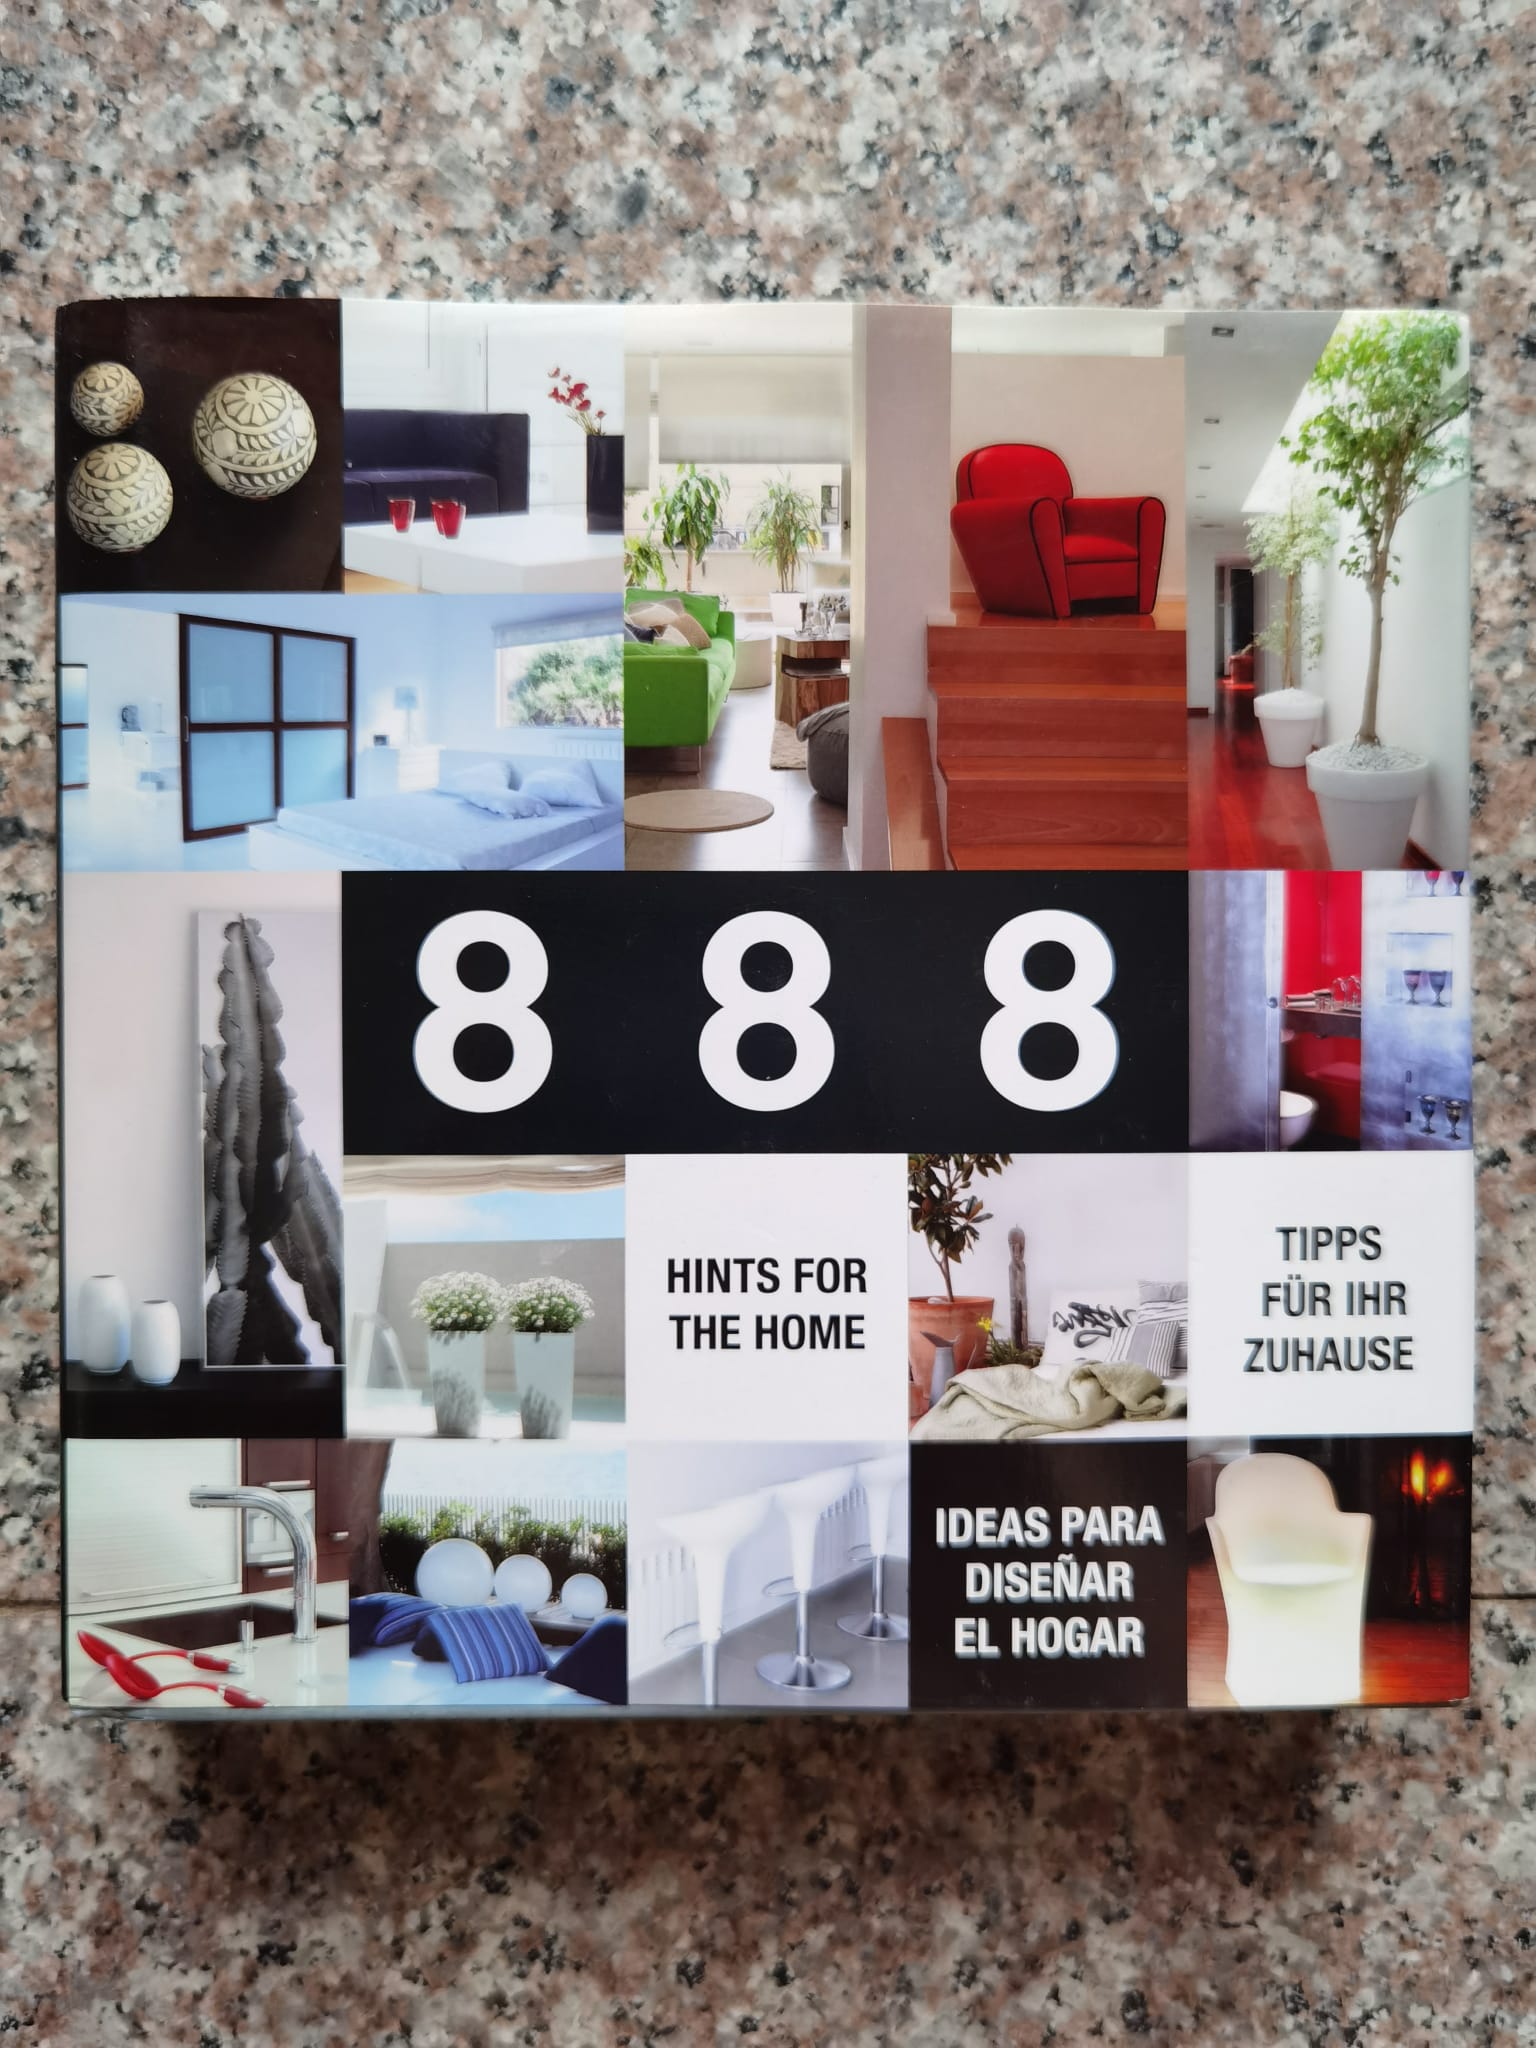 888 hints for home                                                                                   colectiv                                                                                            